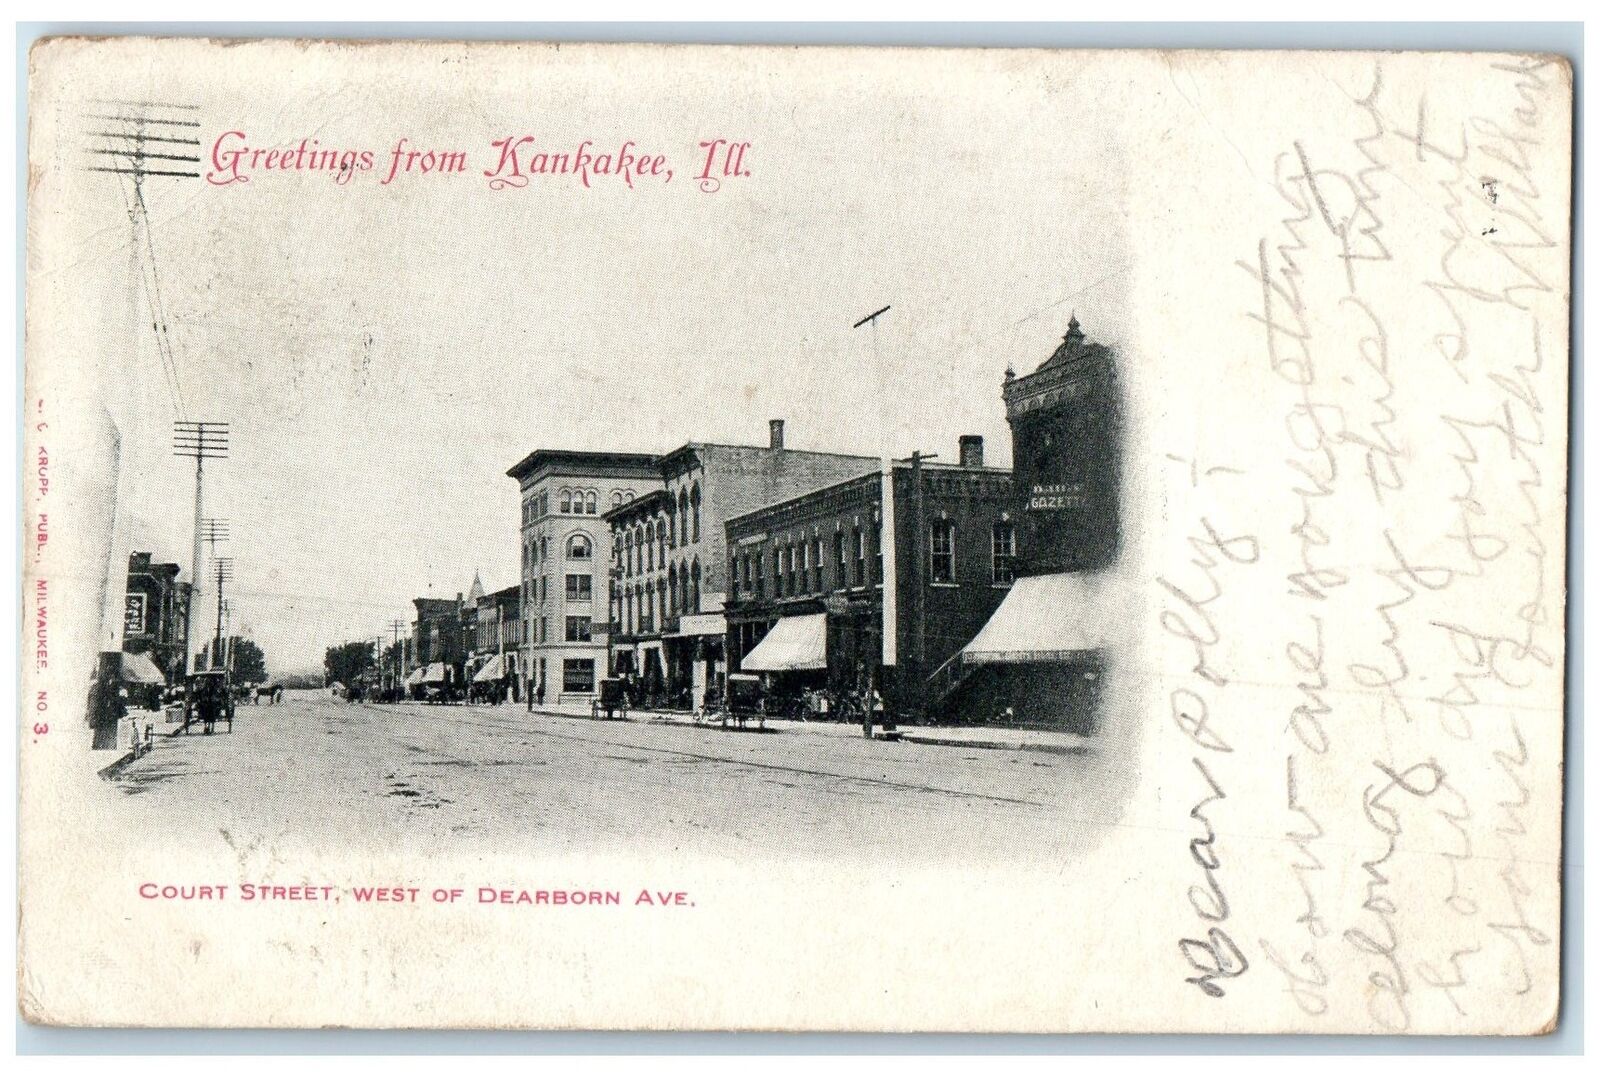 1907 Greetings From Kankakee Court Street West Of Dearborn Ave Illinois Postcard